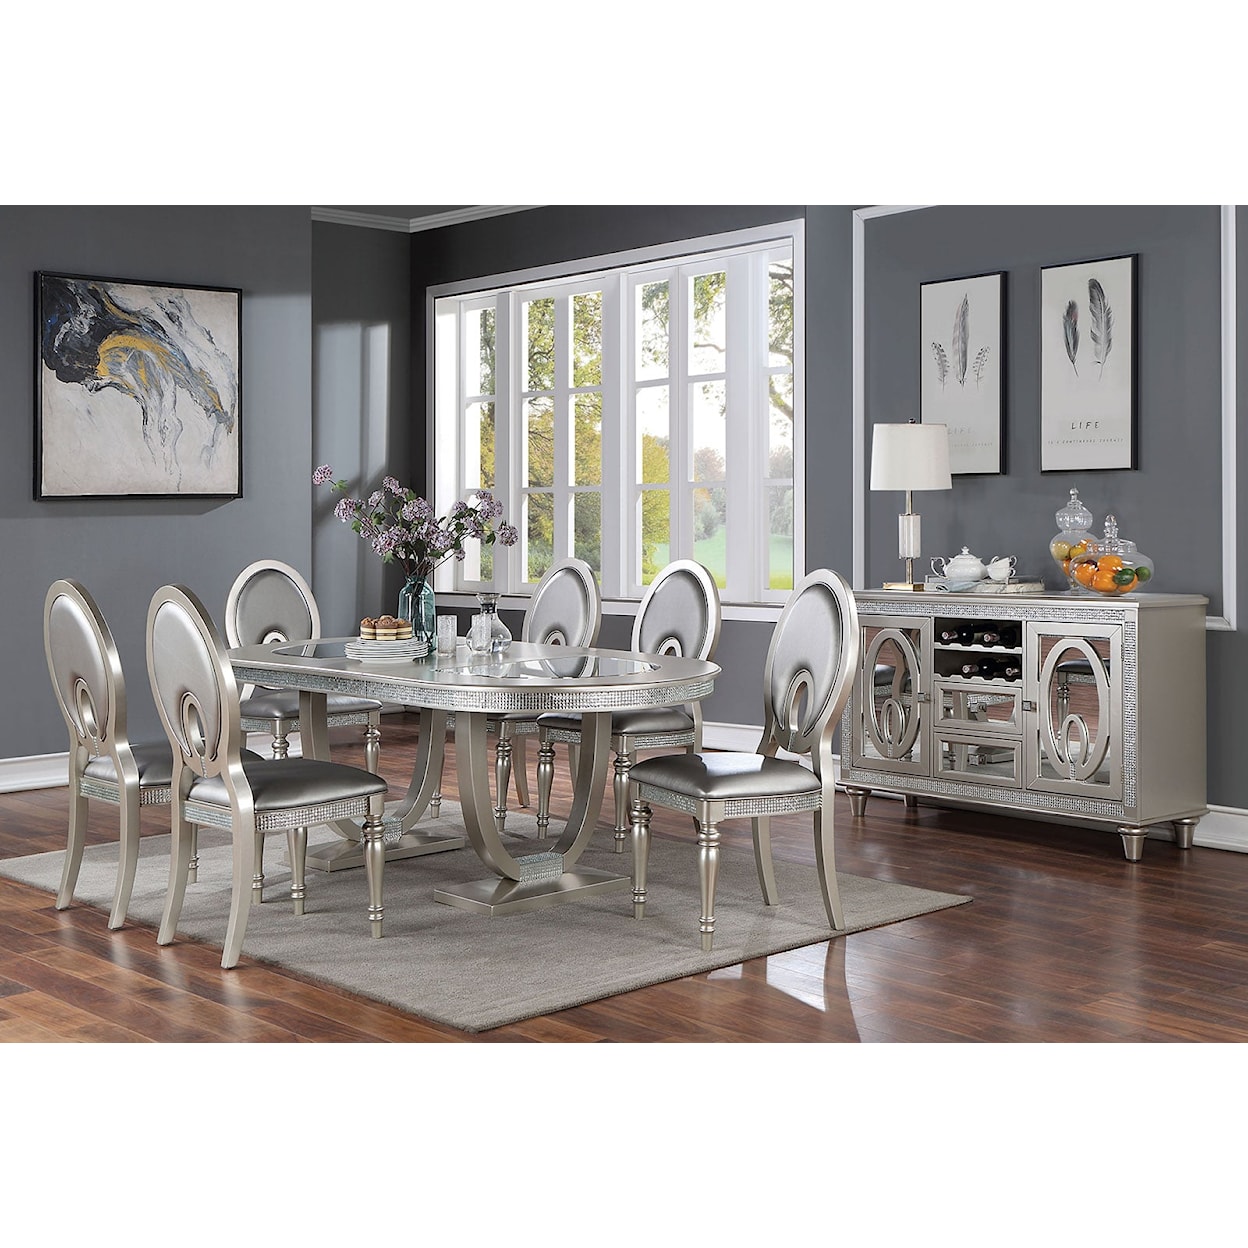 Furniture of America CATHALINA Oval Dining Table